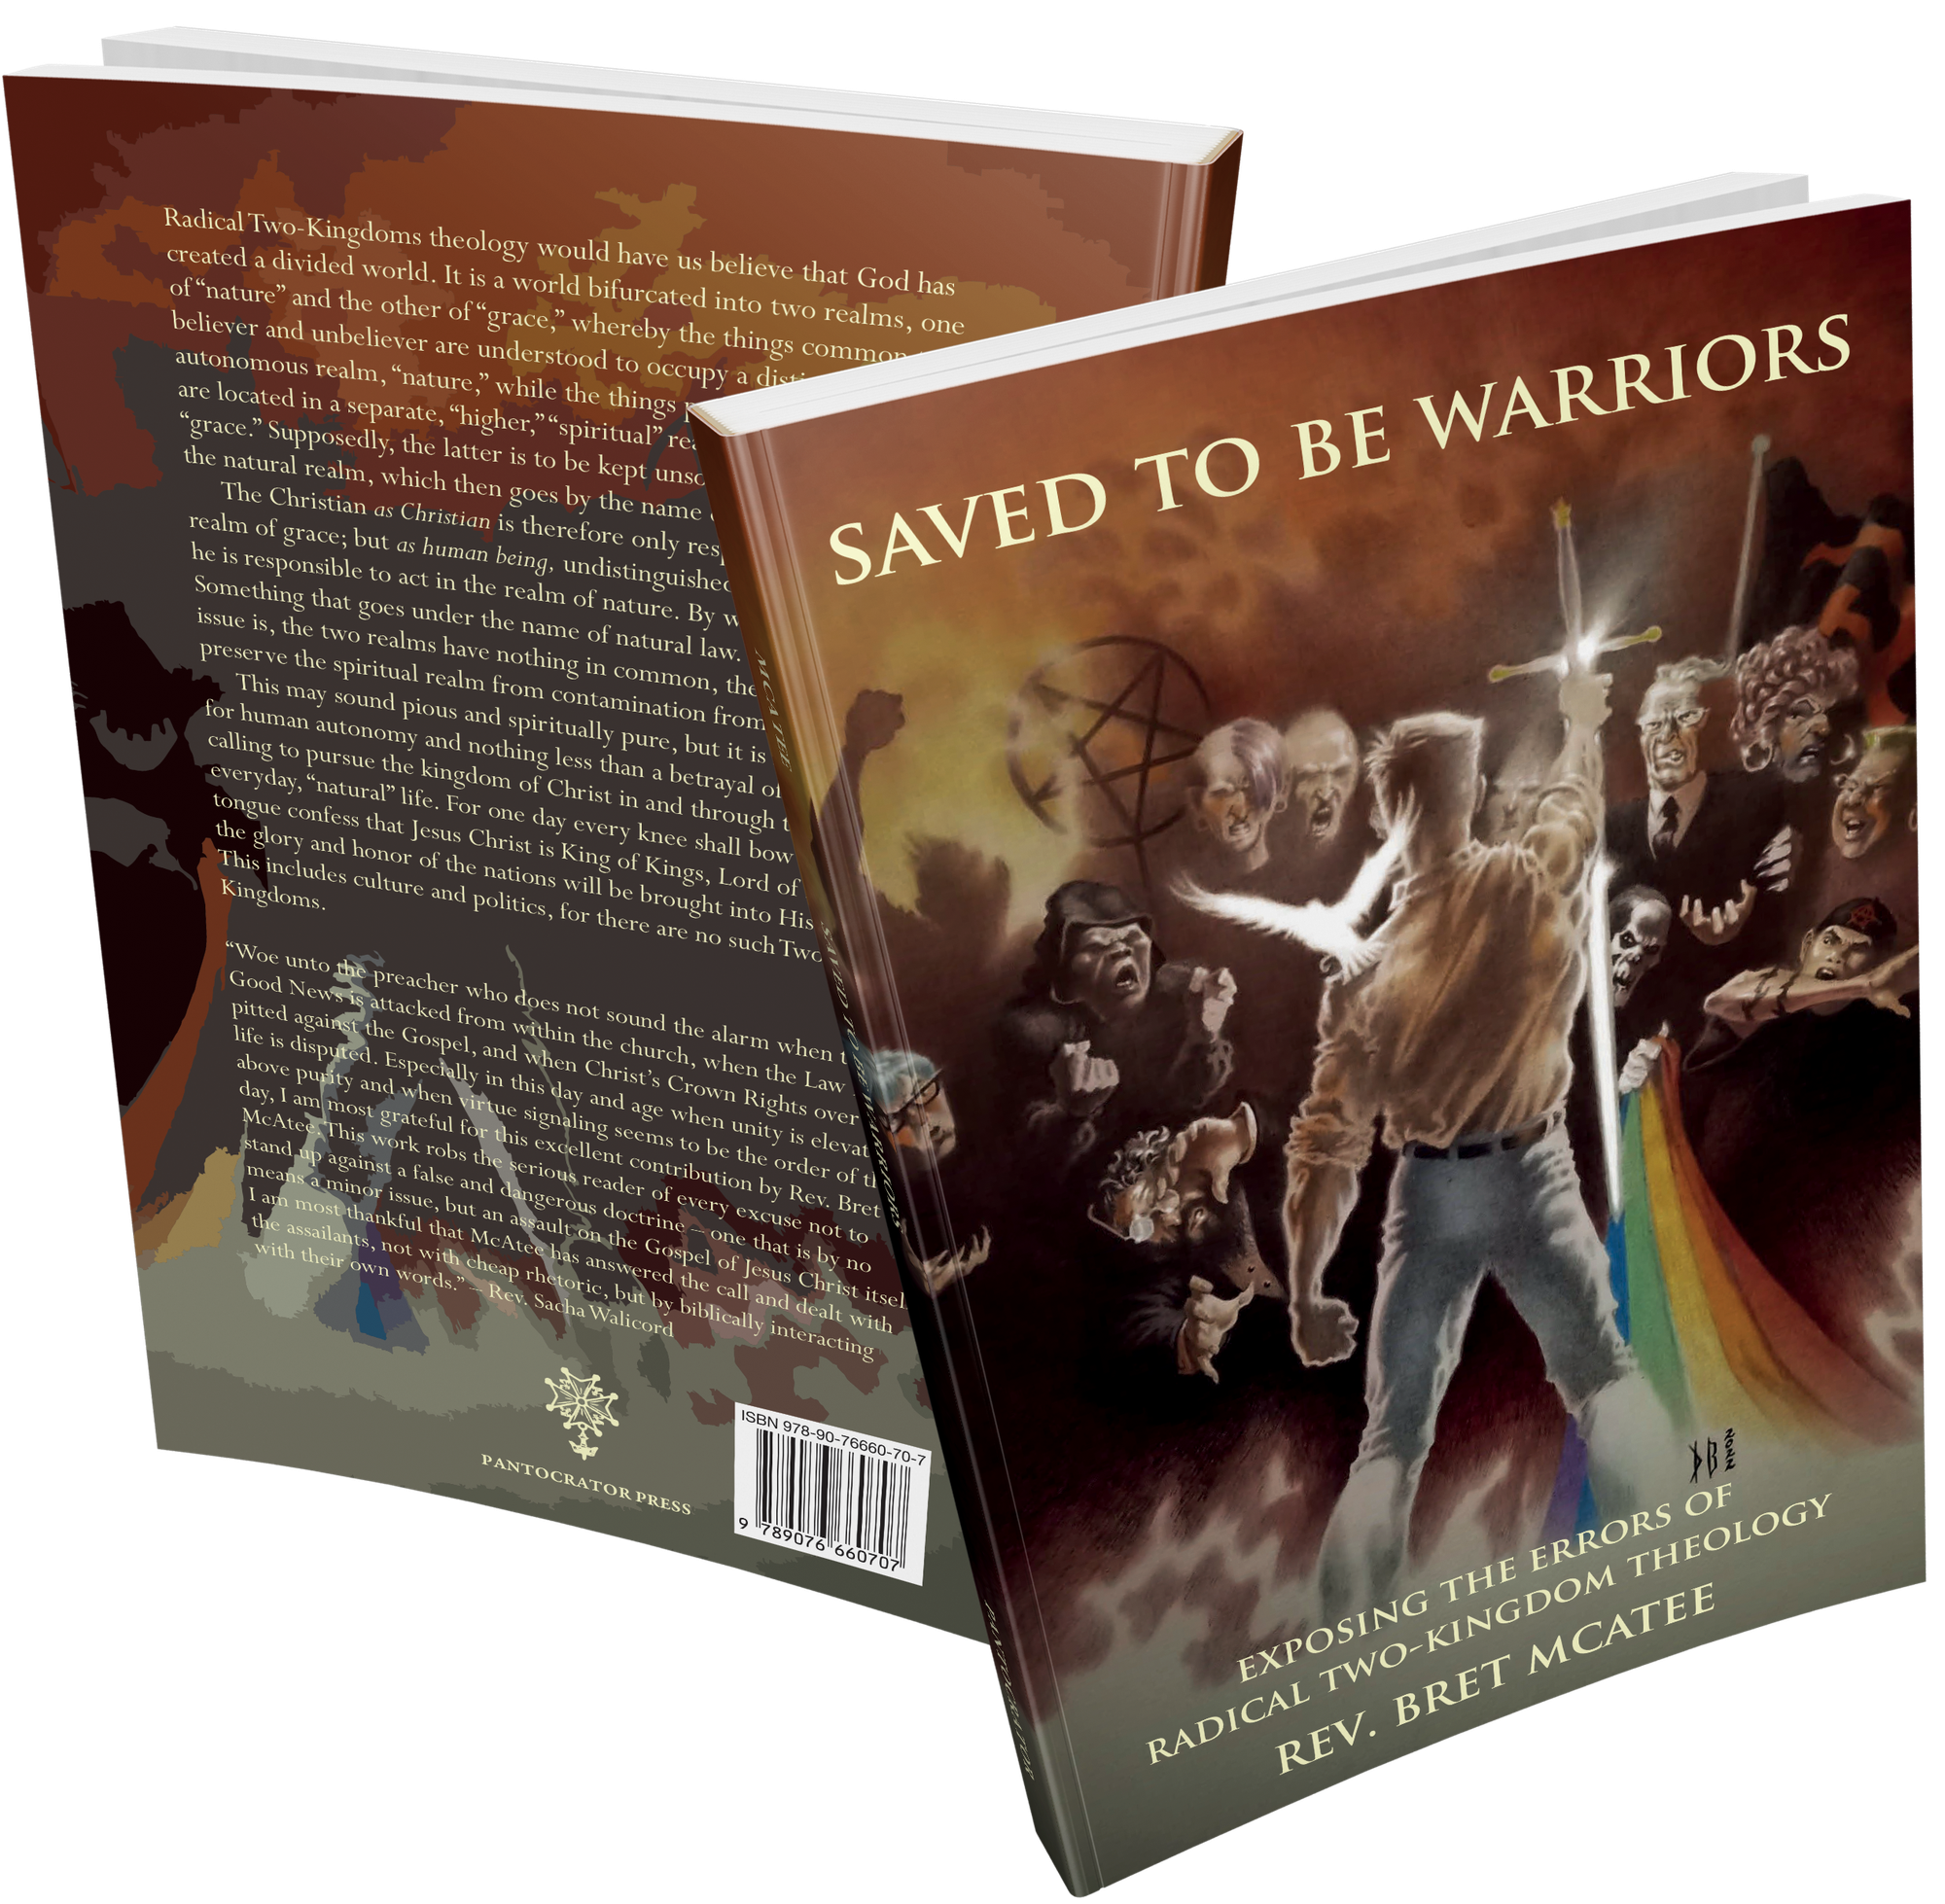 Saved to be Warriors: Exposing the Errors of Radical Two-Kingdom Theology